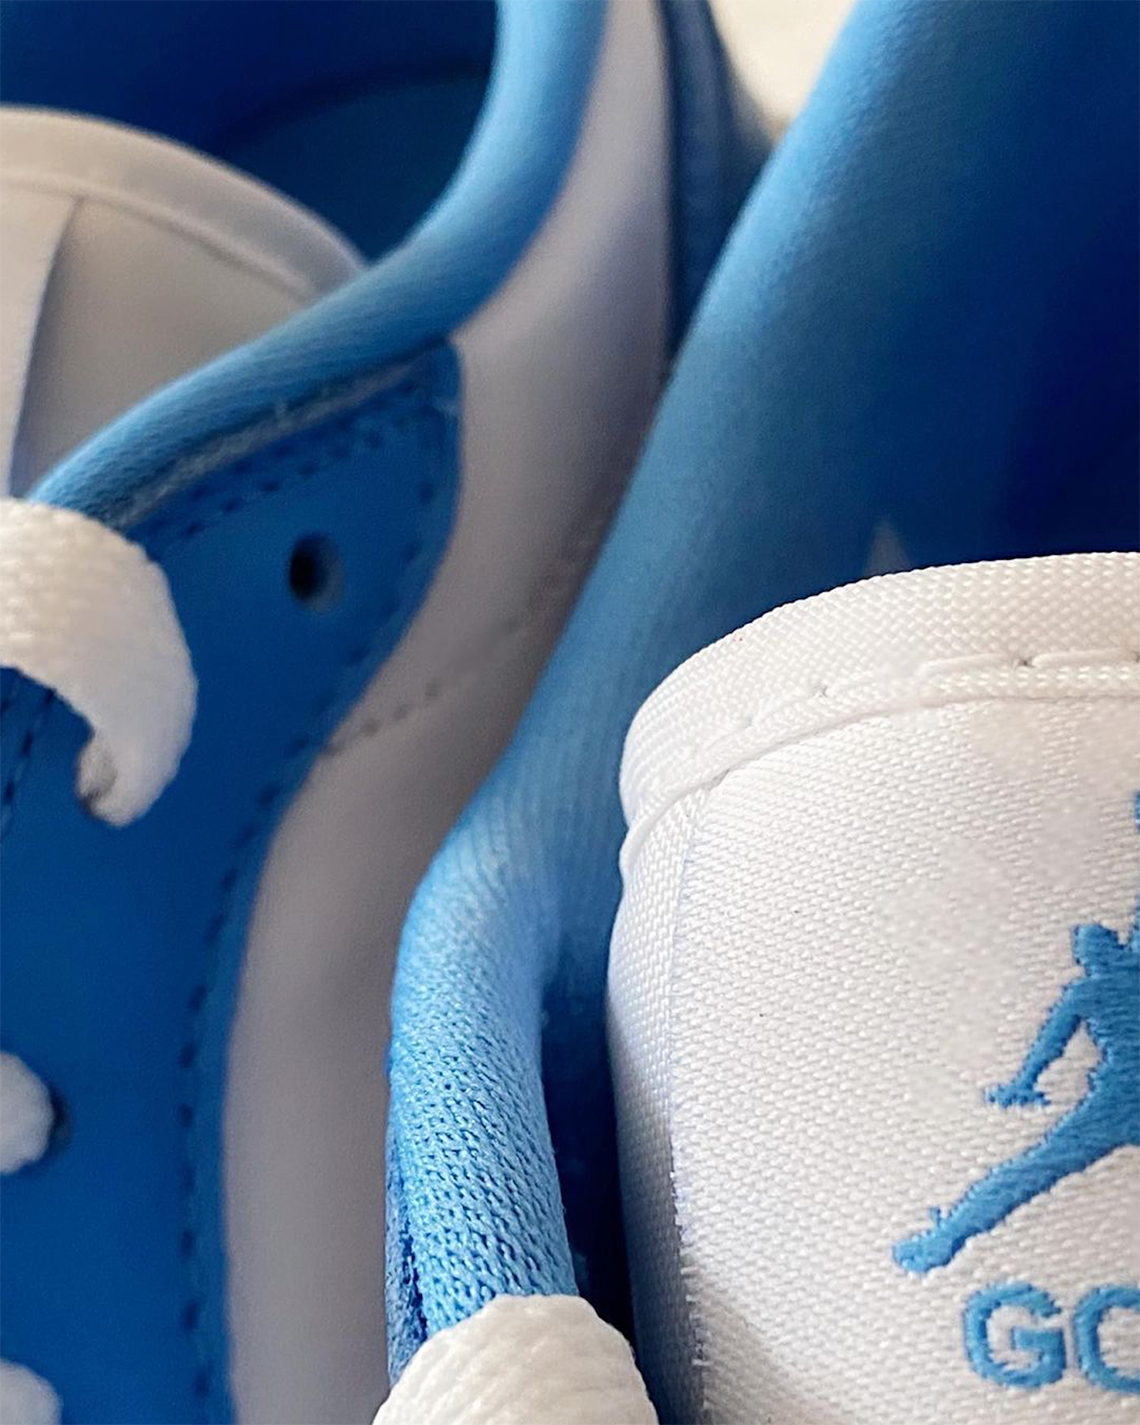 Set your alarms: Nike is releasing Air Jordan Low G golf shoes in iconic  “University Blue” colorway, Golf Equipment: Clubs, Balls, Bags